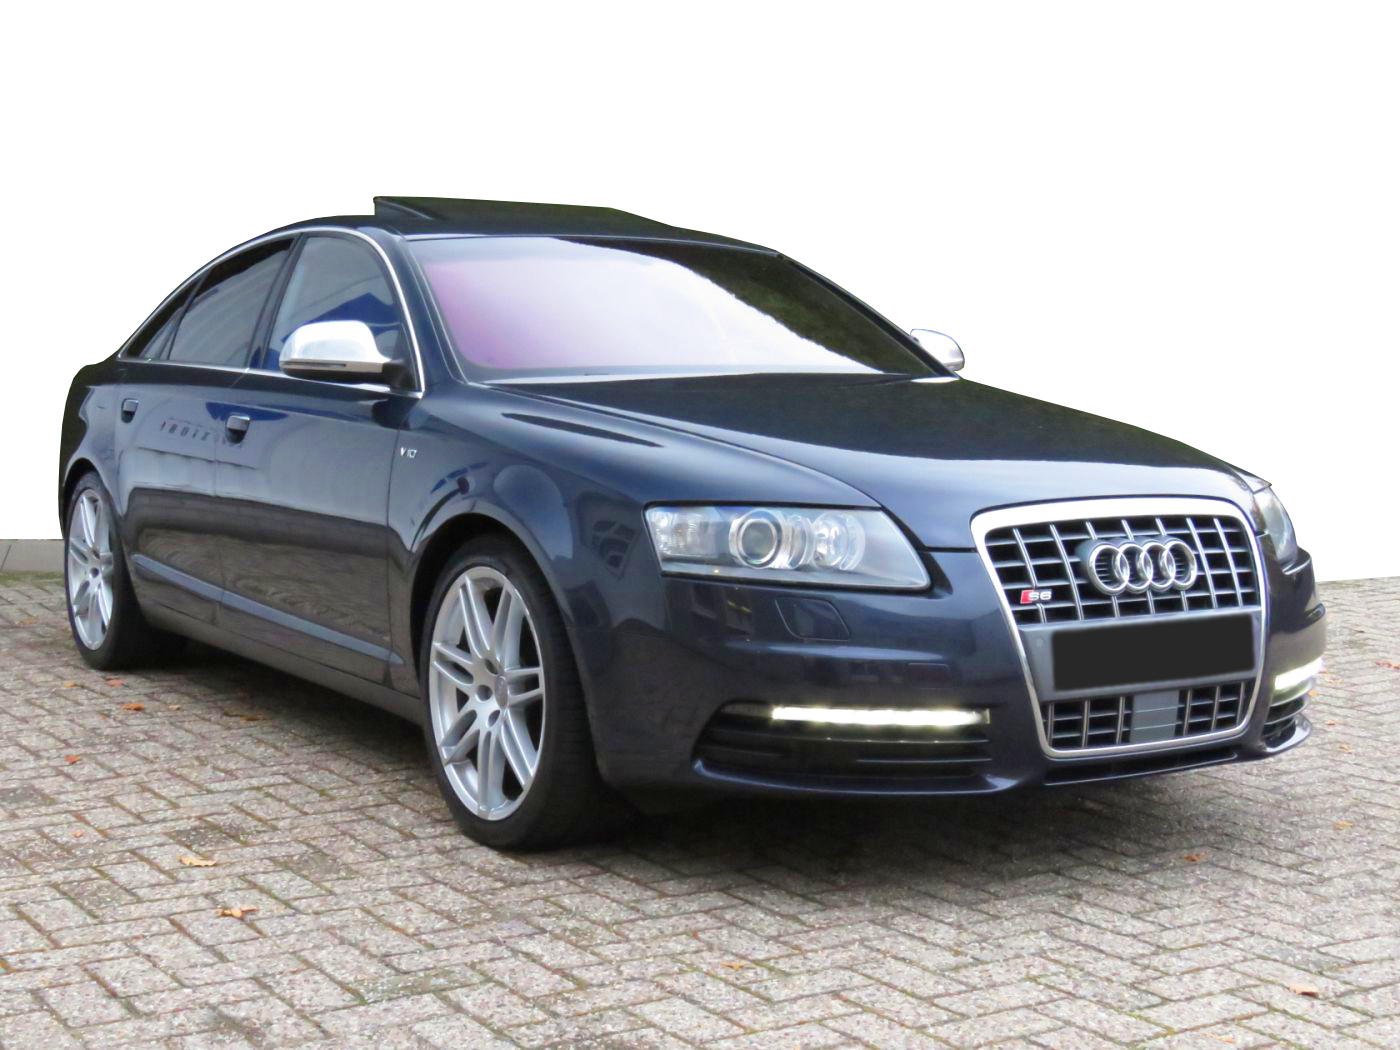 Audi S6 (C6/4F) 2006-2010 | Different Car Review